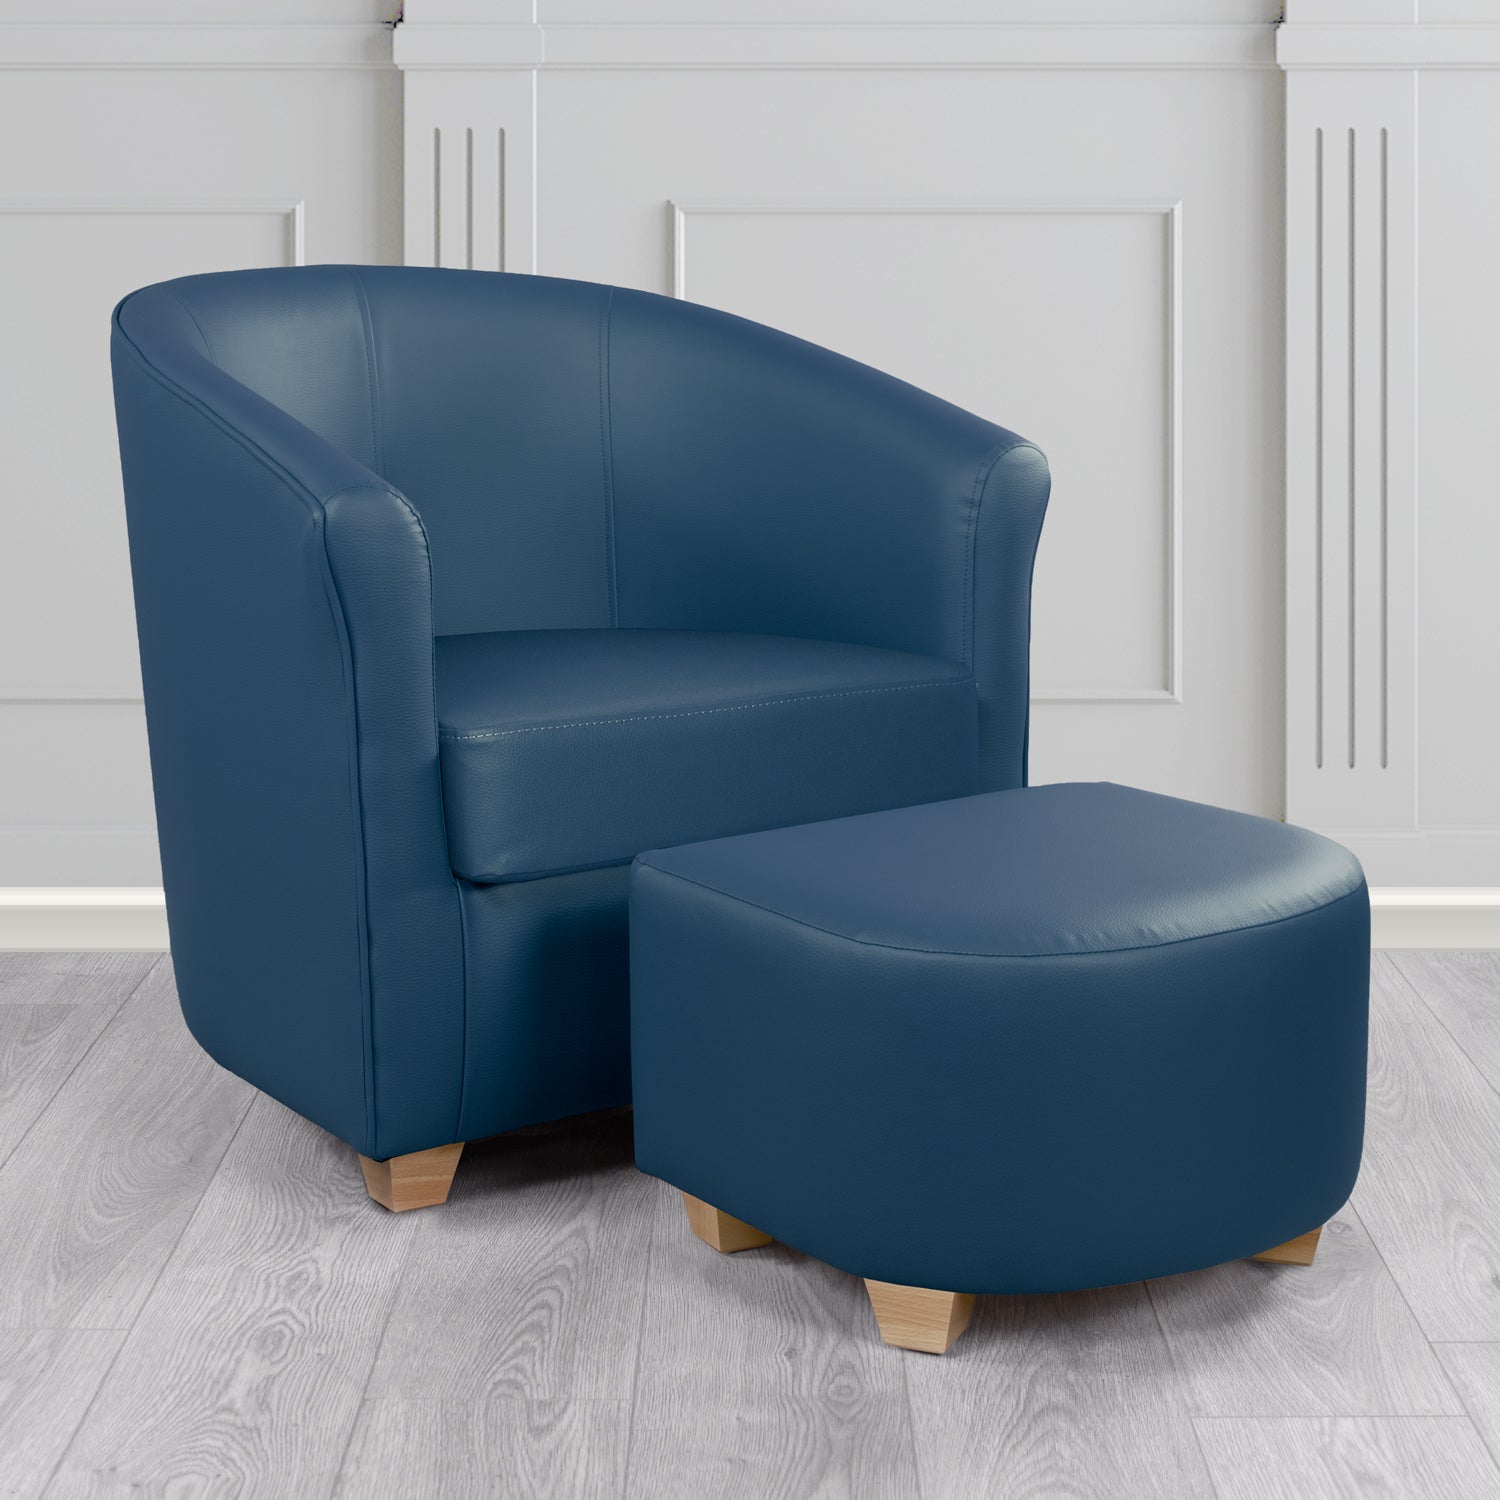 Cannes Tub Chair with Footstool Set in Just Colour Sapphire Blue Crib 5 Faux Leather